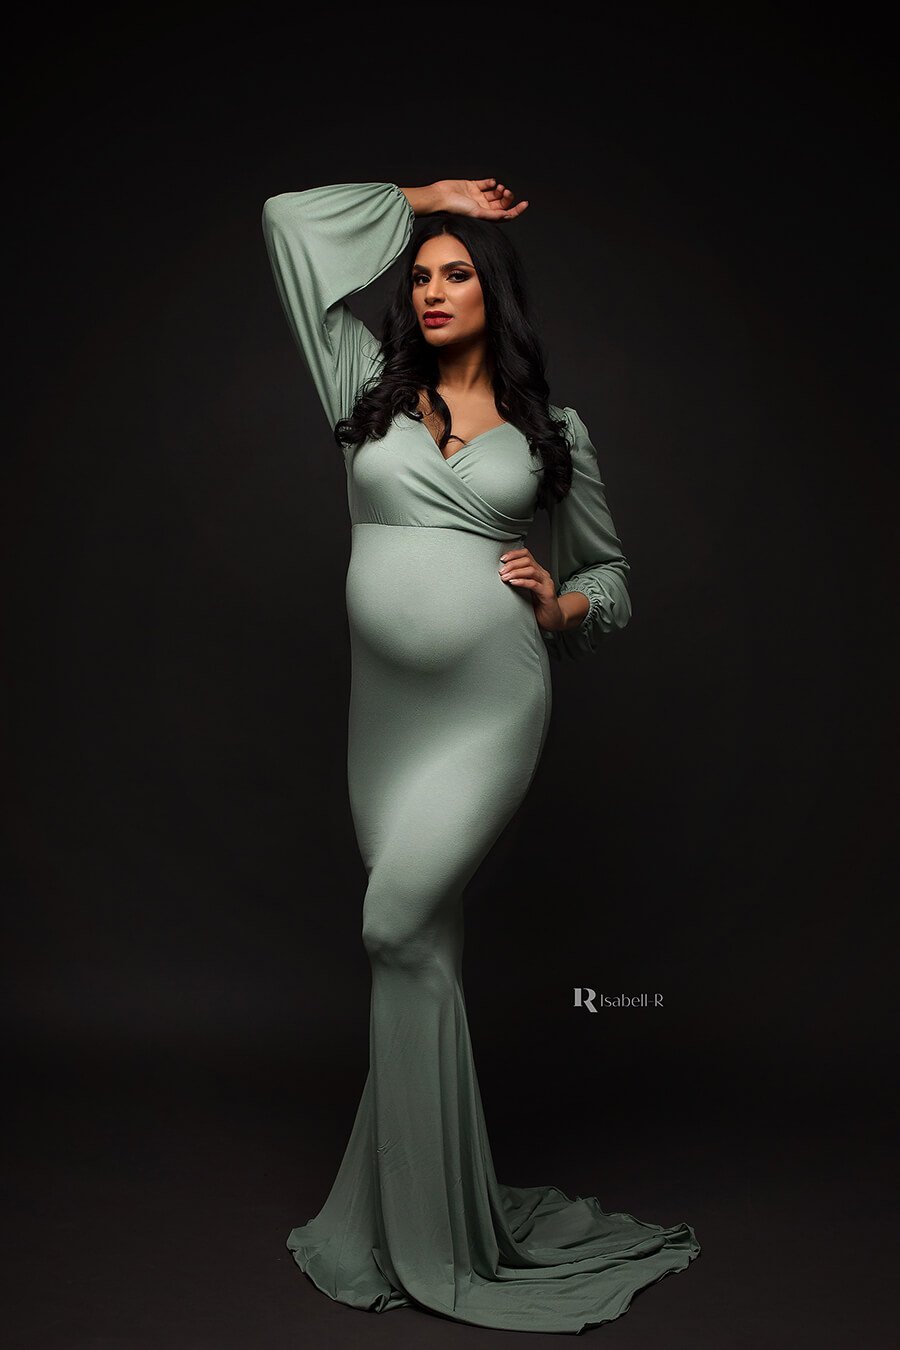 brunette pregnant model poses in a dark studio wearing an azur long jersey dress. the dress features an adjustable sweetheart top and bishop sleeves. the dress is long and features a mermaid skirt.